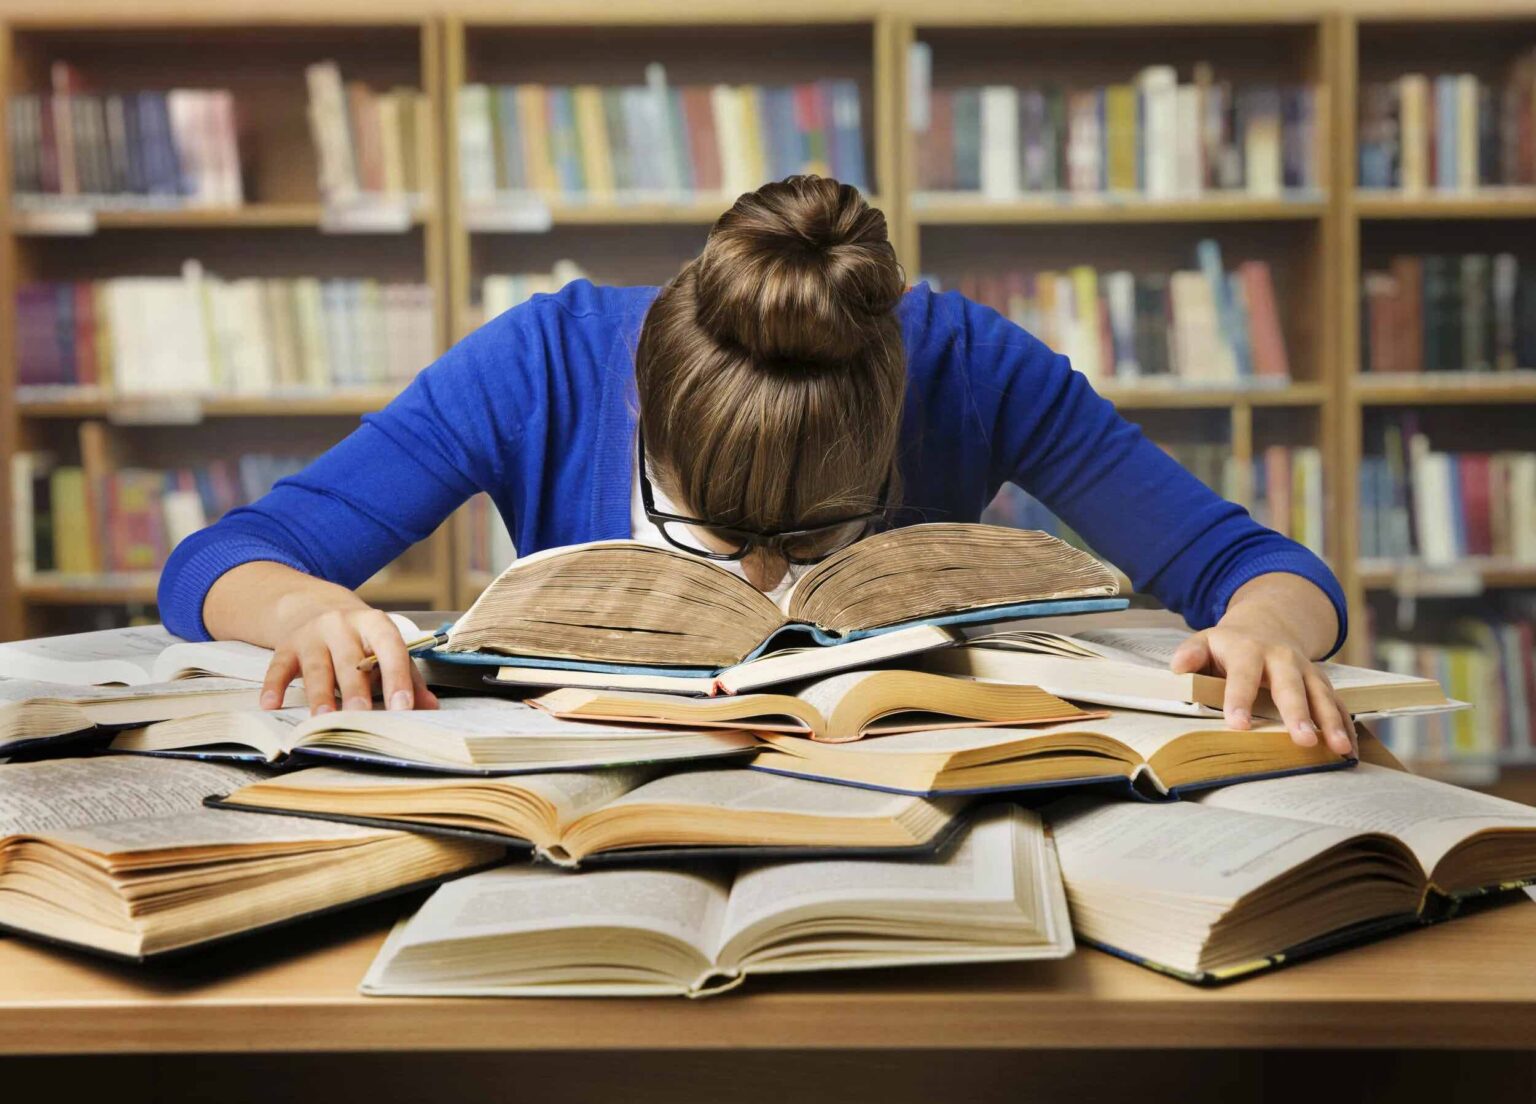 Sometimes its hard to stay focused while studying, but luckily there are things you can do to help yourself. Get the hottest studying tips right here.